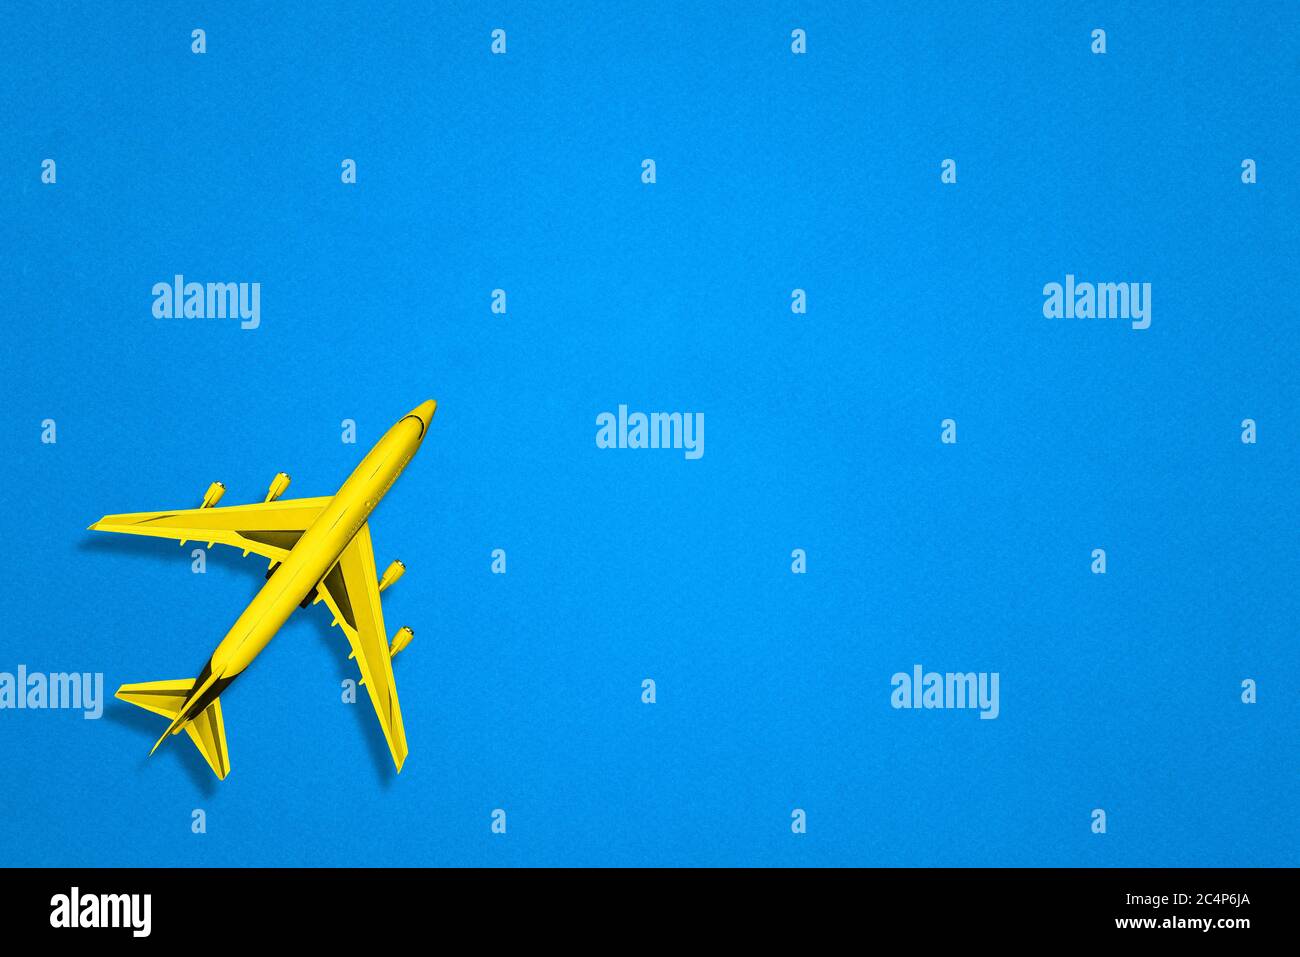 Yellow passenger plane on a blue paper background. A vehicle for delivering people, parcels, and other cargo. The concept of logistics and travel. A Stock Photo